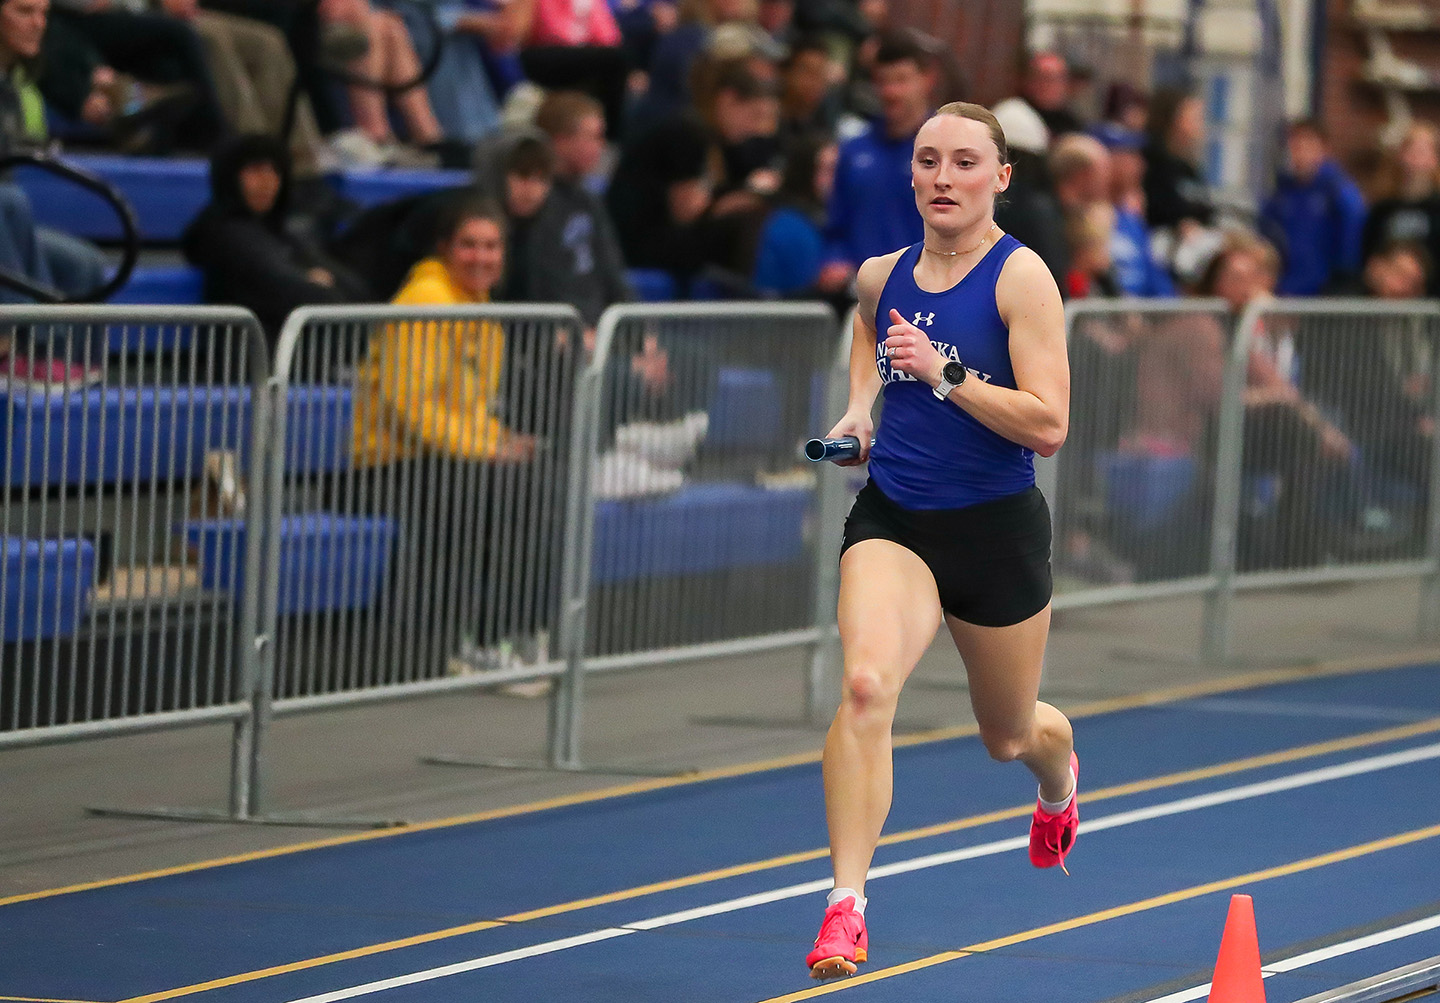 As a student-athlete, UNK senior Hannah Harrison recognizes the role proper nutrition plays in her training and performances.